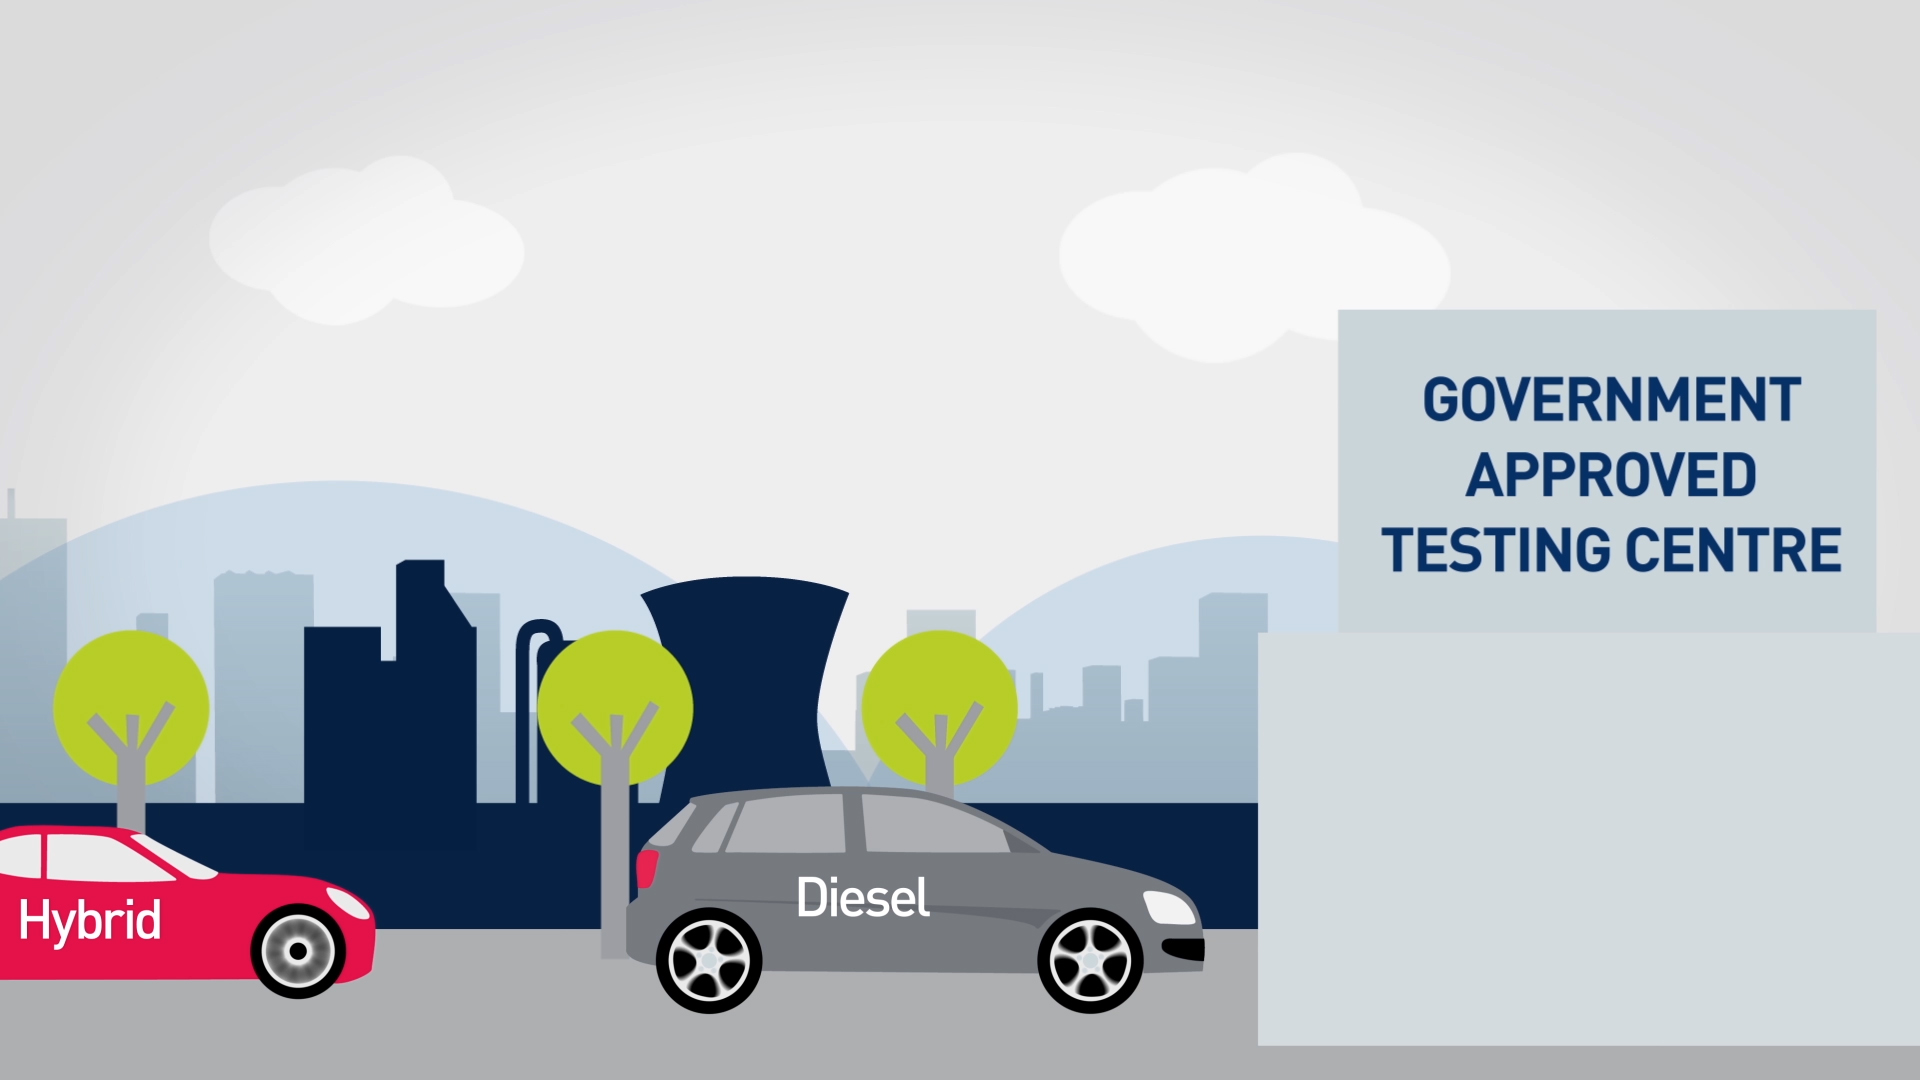 There is widespread confusion about advances in new car technology and official emissions testing.